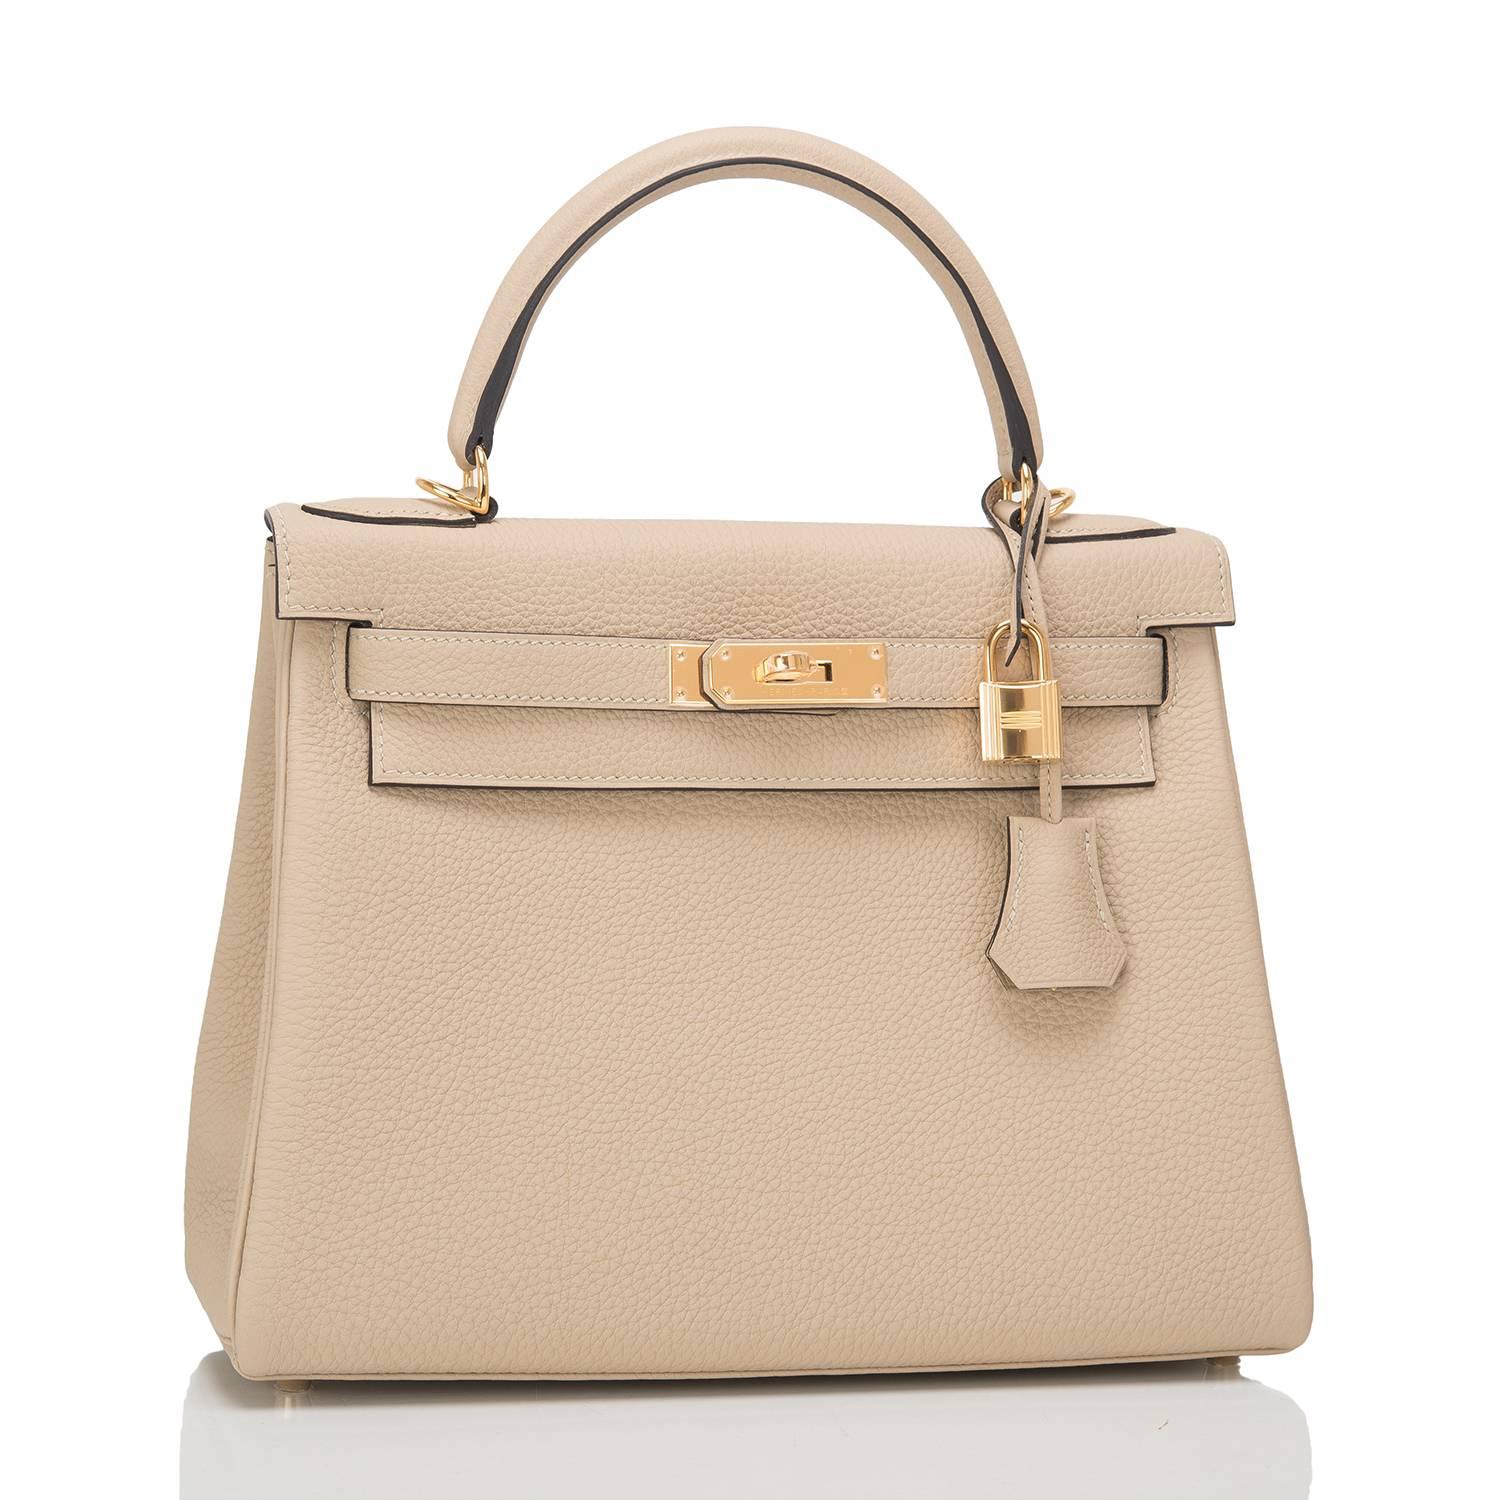 Hermes Trench Kelly 28cm of togo leather with gold hardware.

This Kelly in the Retourne style has tonal stitching, a front toggle closure, a clochette with lock and two keys, a single rolled handle, and a removable shoulder strap.

The Interior